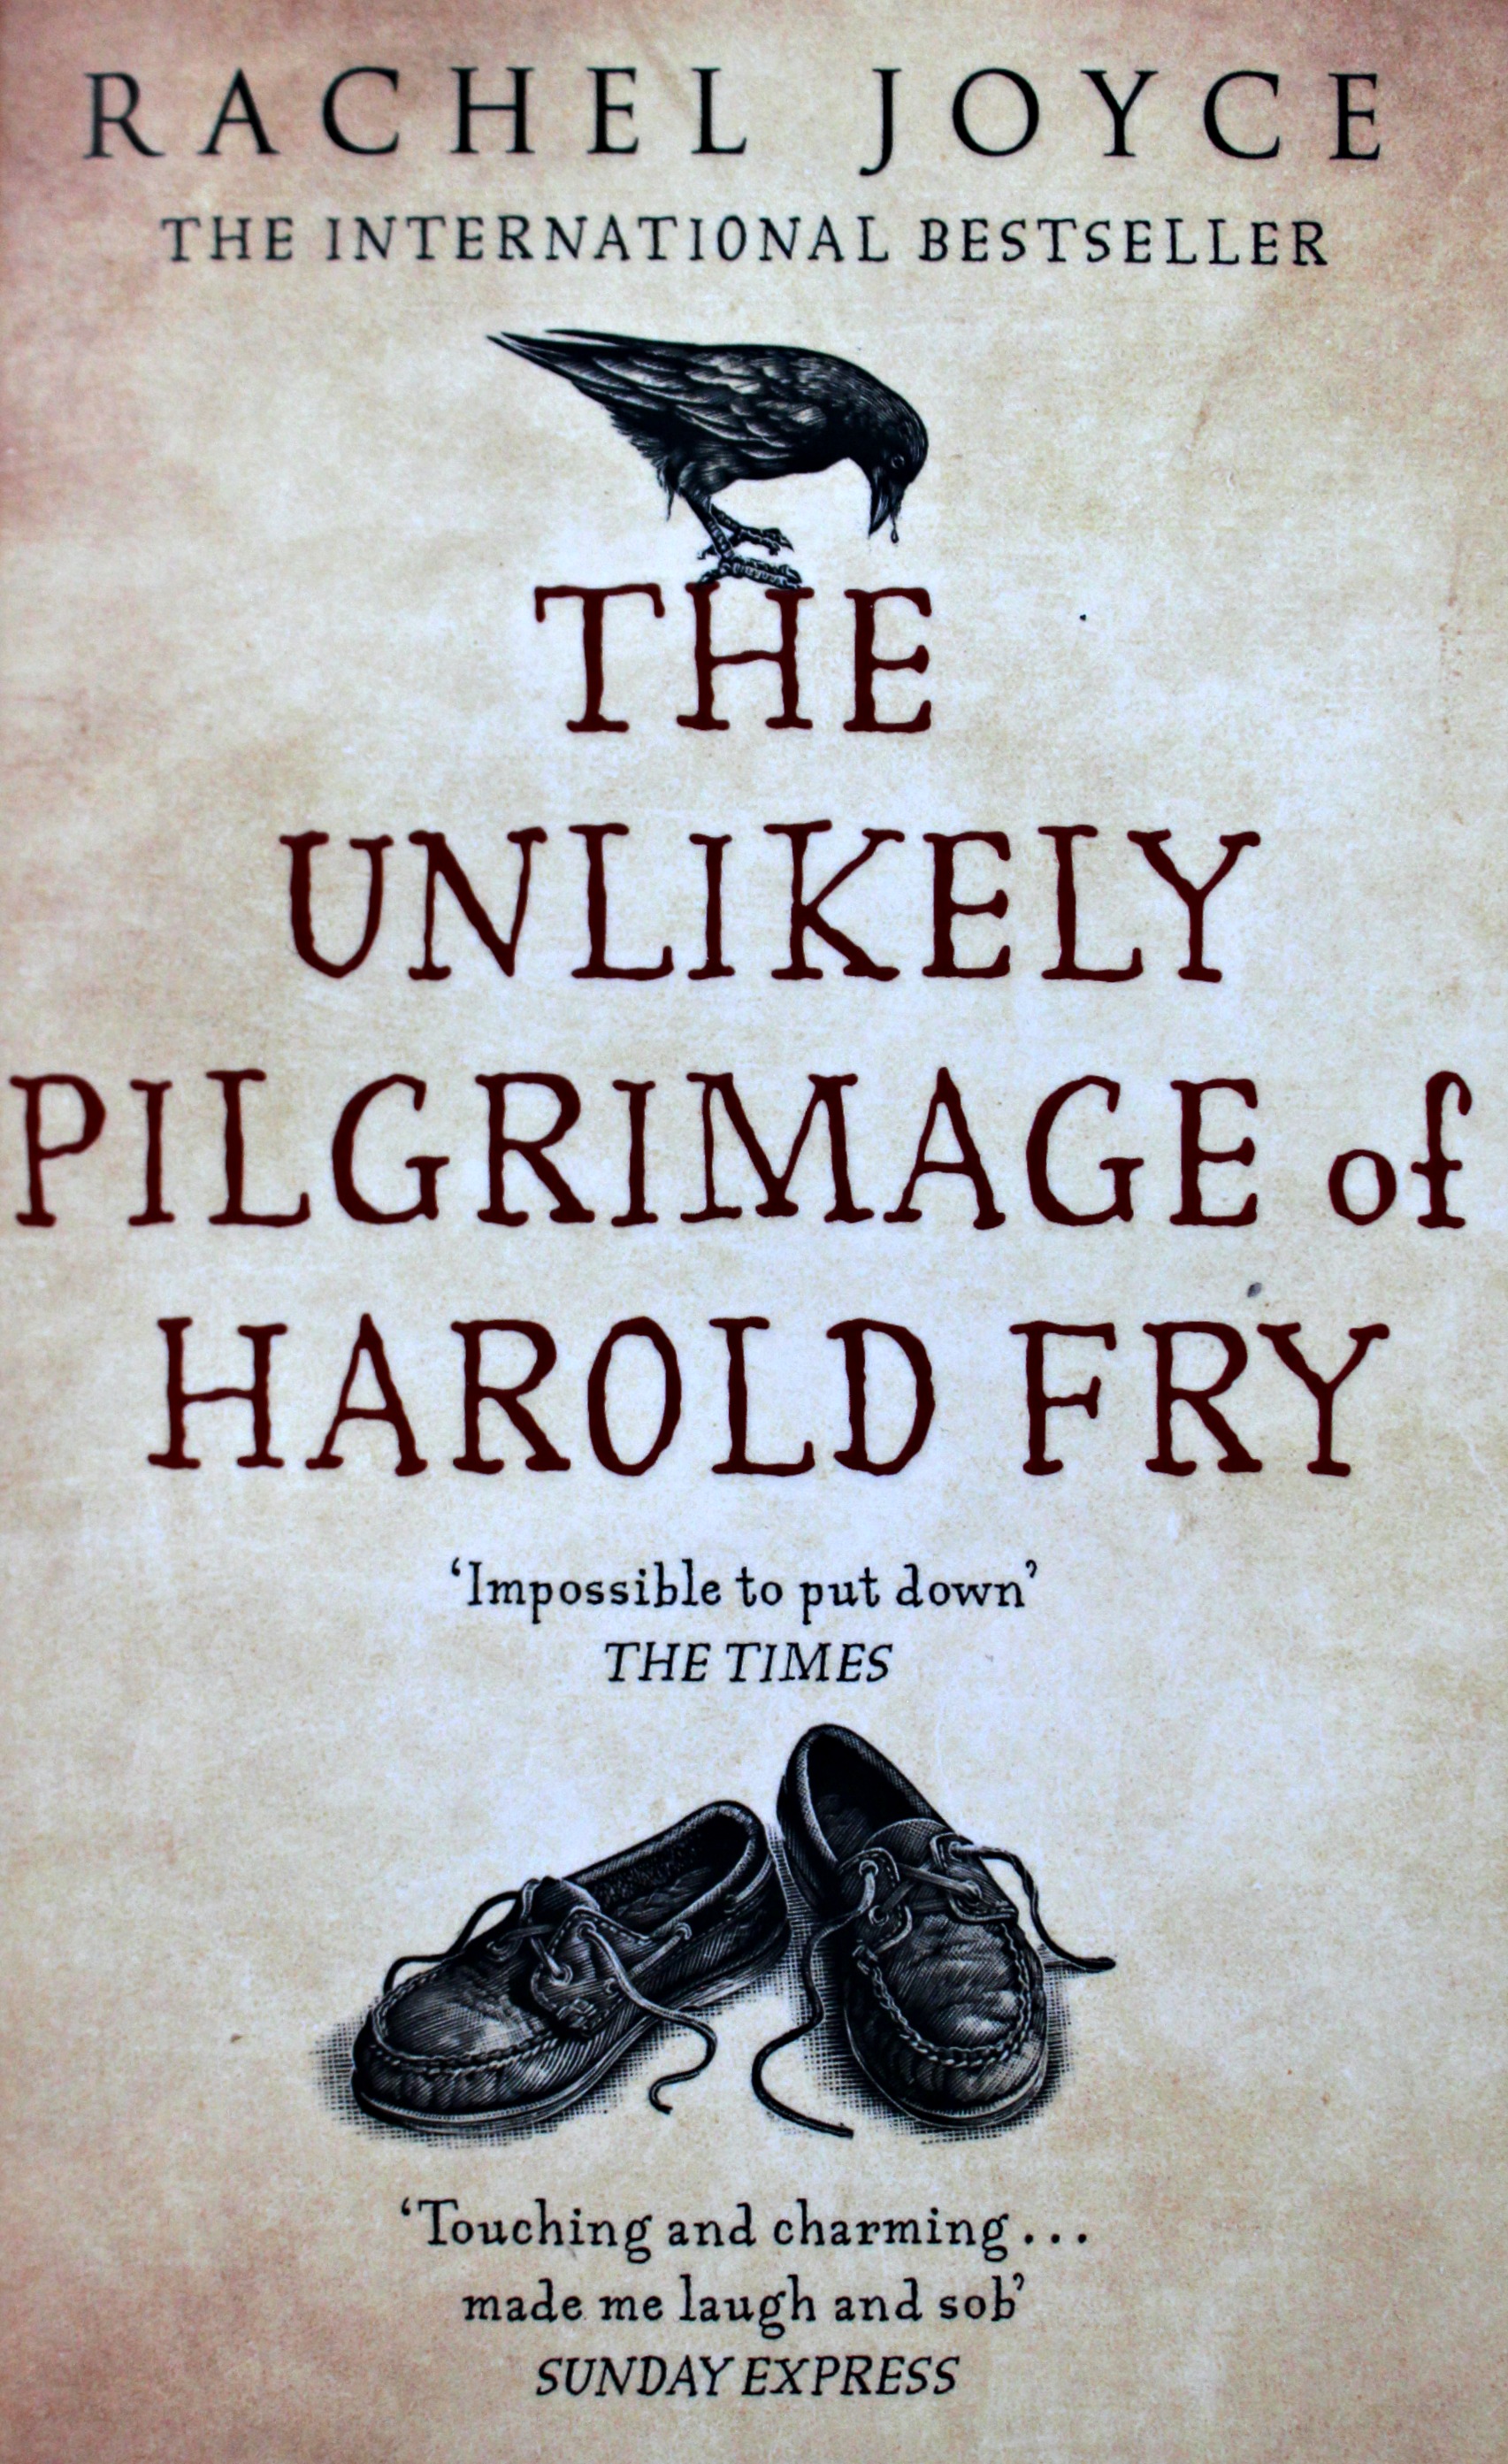 sequel to the unlikely pilgrimage of harold fry